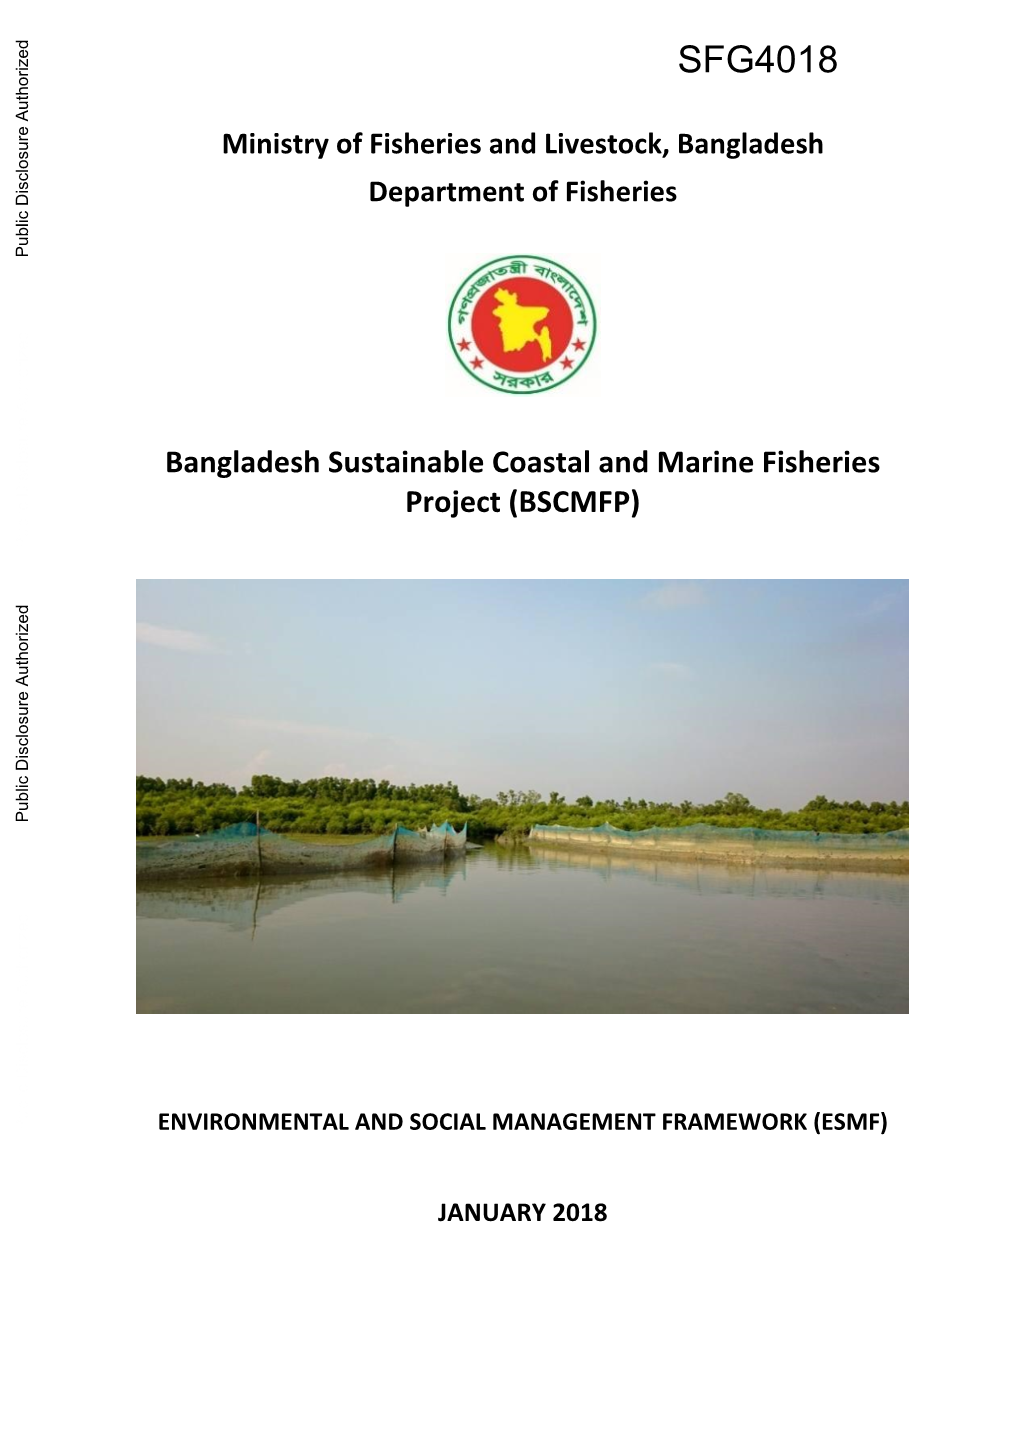 Sustainable Coastal and Marine Fisheries Project (BSCMFP)